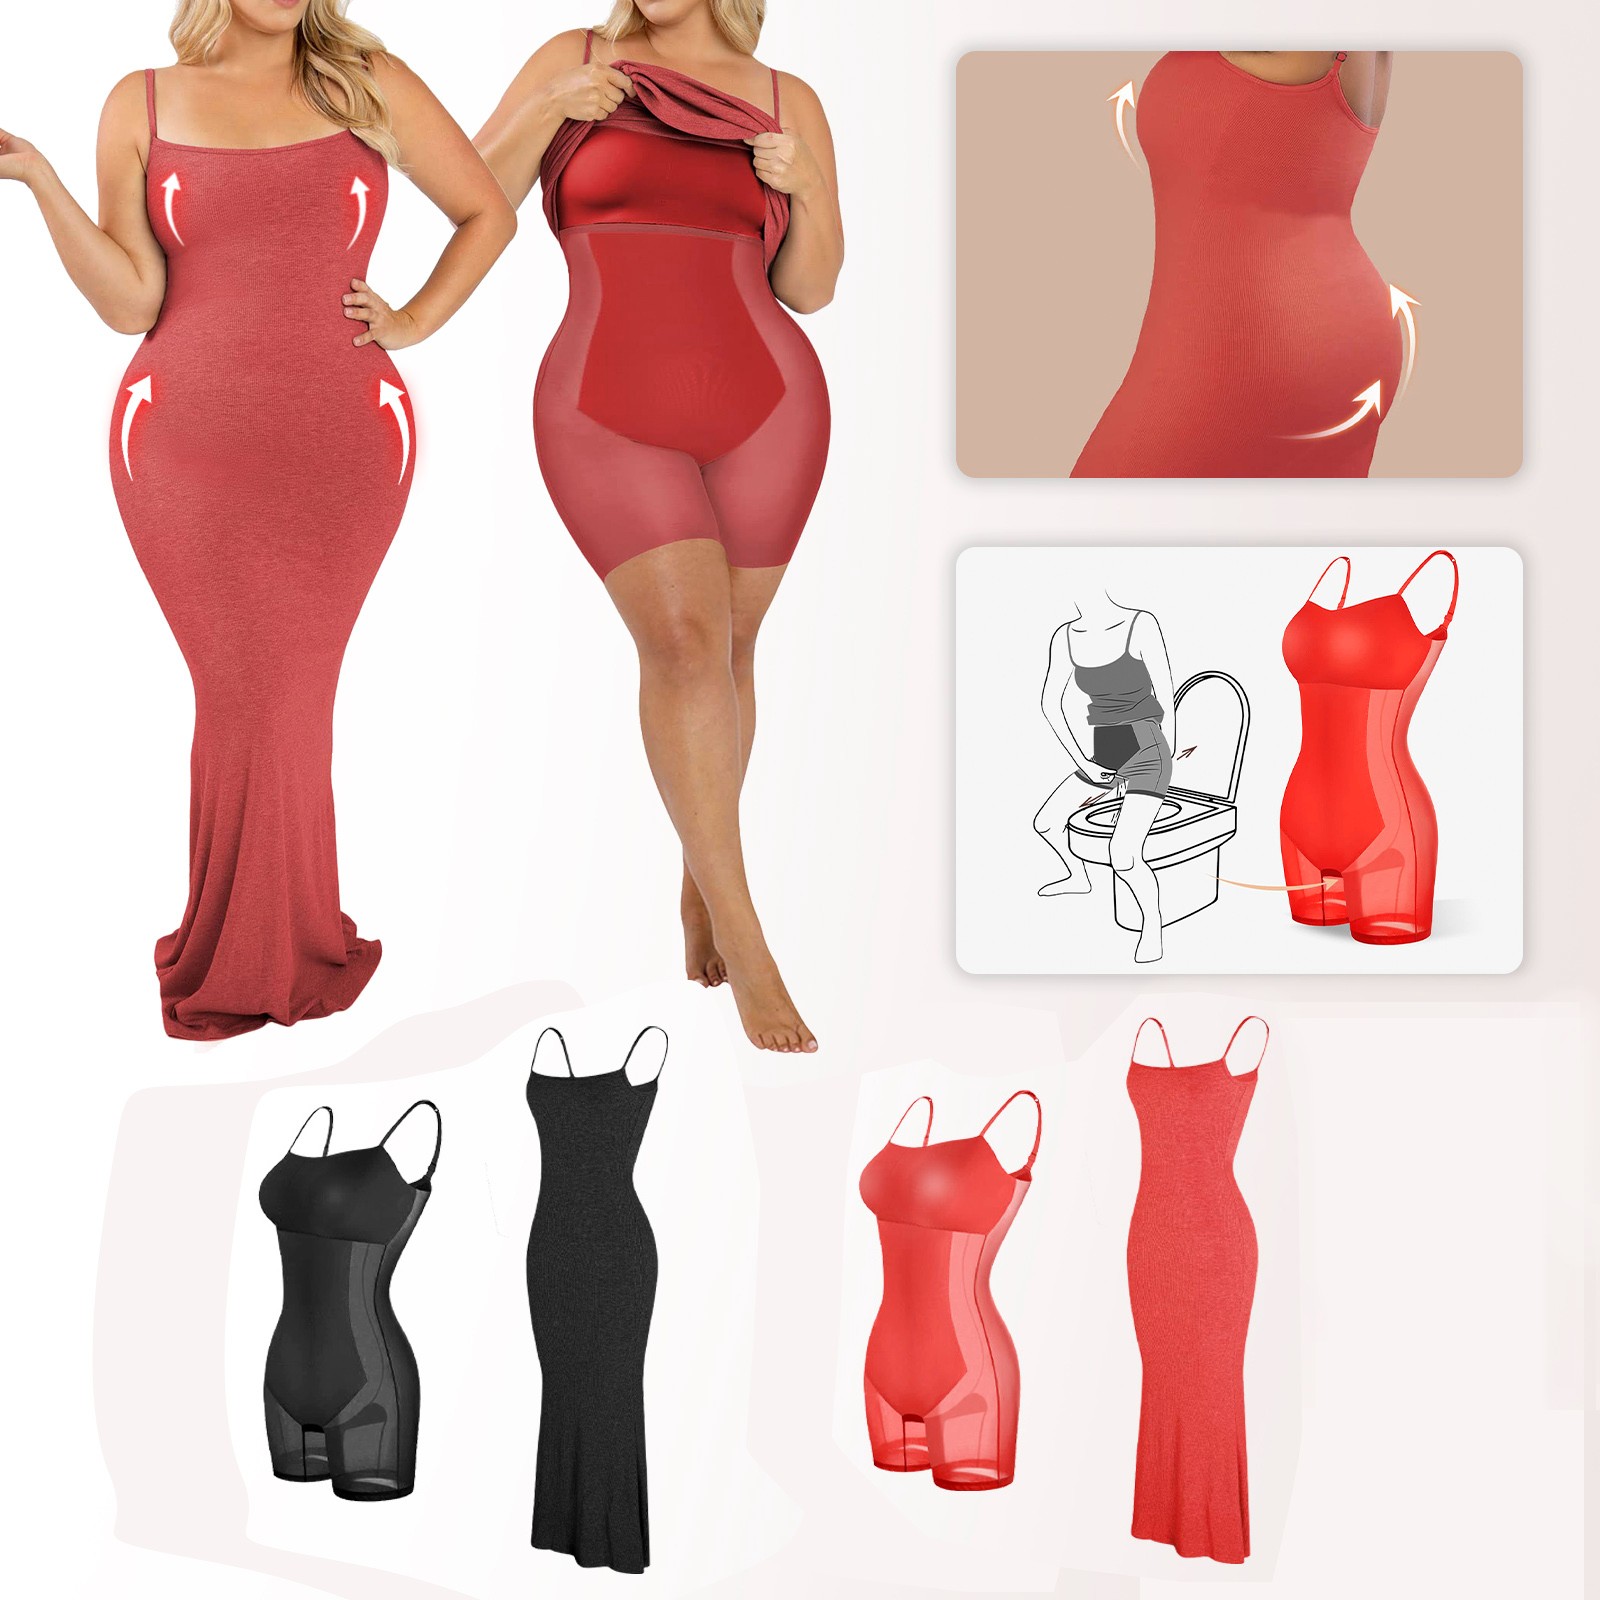 shapeminow 5bbba6e4 3ee0 4609 a8a7 773eb679fe81 | ShapeMiNow is your go-to store for all kinds of body shapers, dresses, and statement pieces.